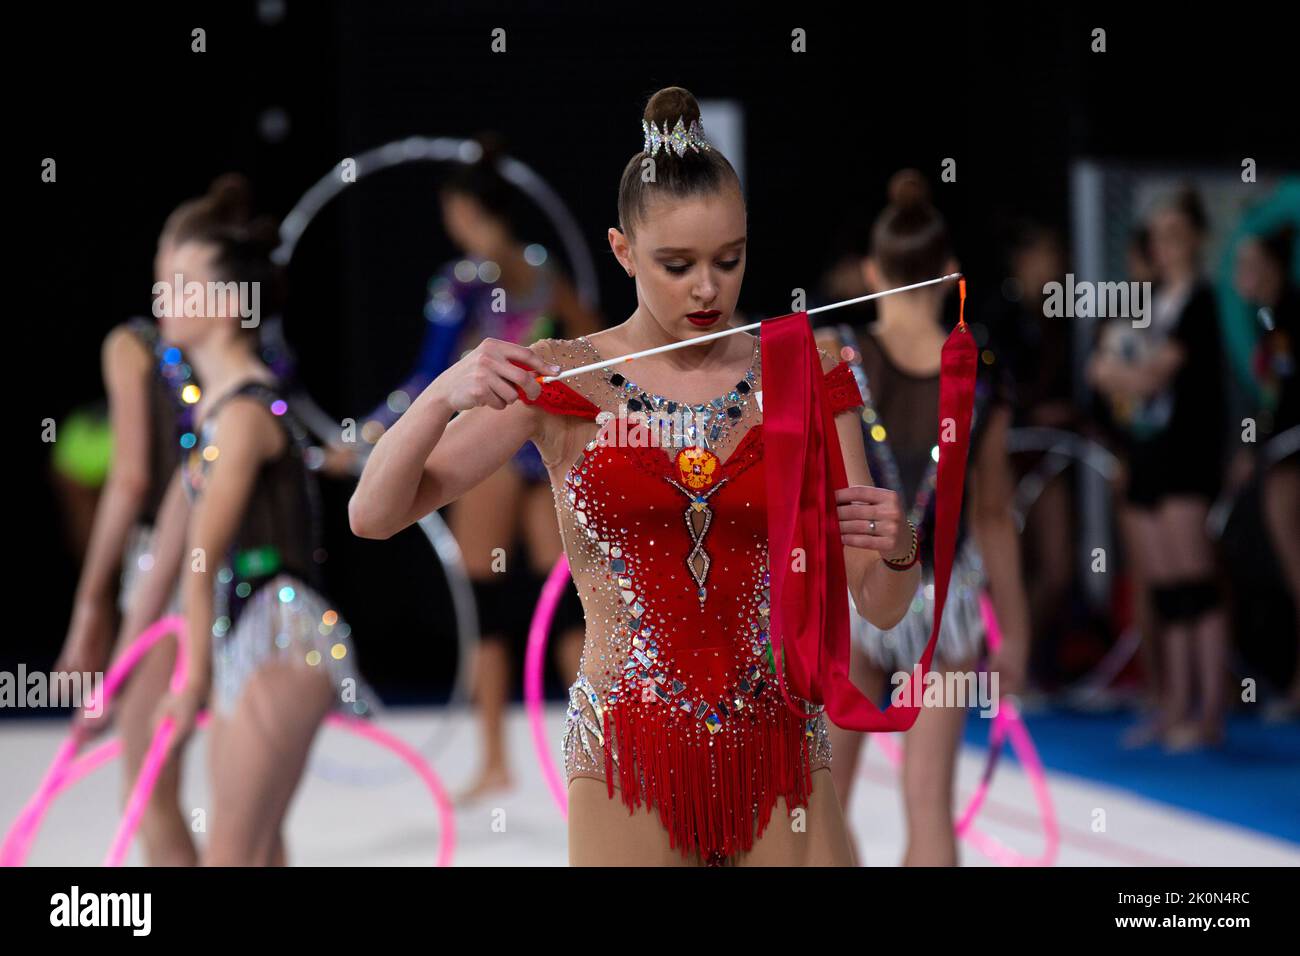 Moscow, Russia. 12th of September, 2022. Russian athletes perform in a qualification at the 2022 All-Russian Summer Spartakiad in Rhythmic Gymnastics at Irina Viner-Usmanova Gymnastics Palace in Luzhniki in Moscow, Russia. Nikolay Vinokurov/Alamy Live News Stock Photo